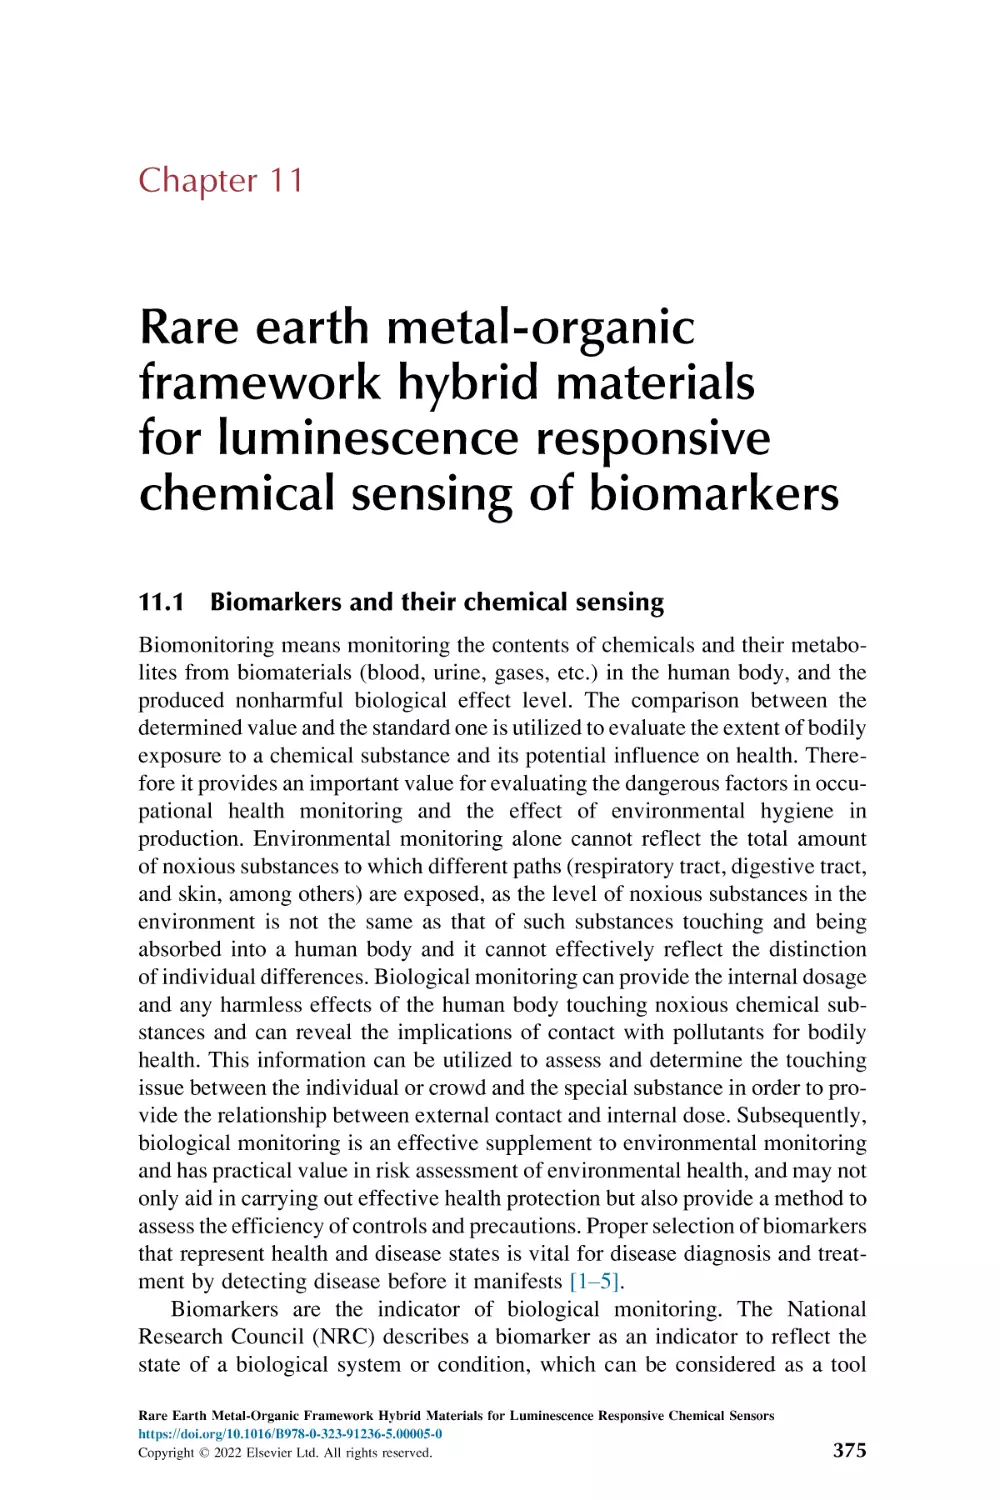 Chapter 11
11.1. Biomarkers and their chemical sensing